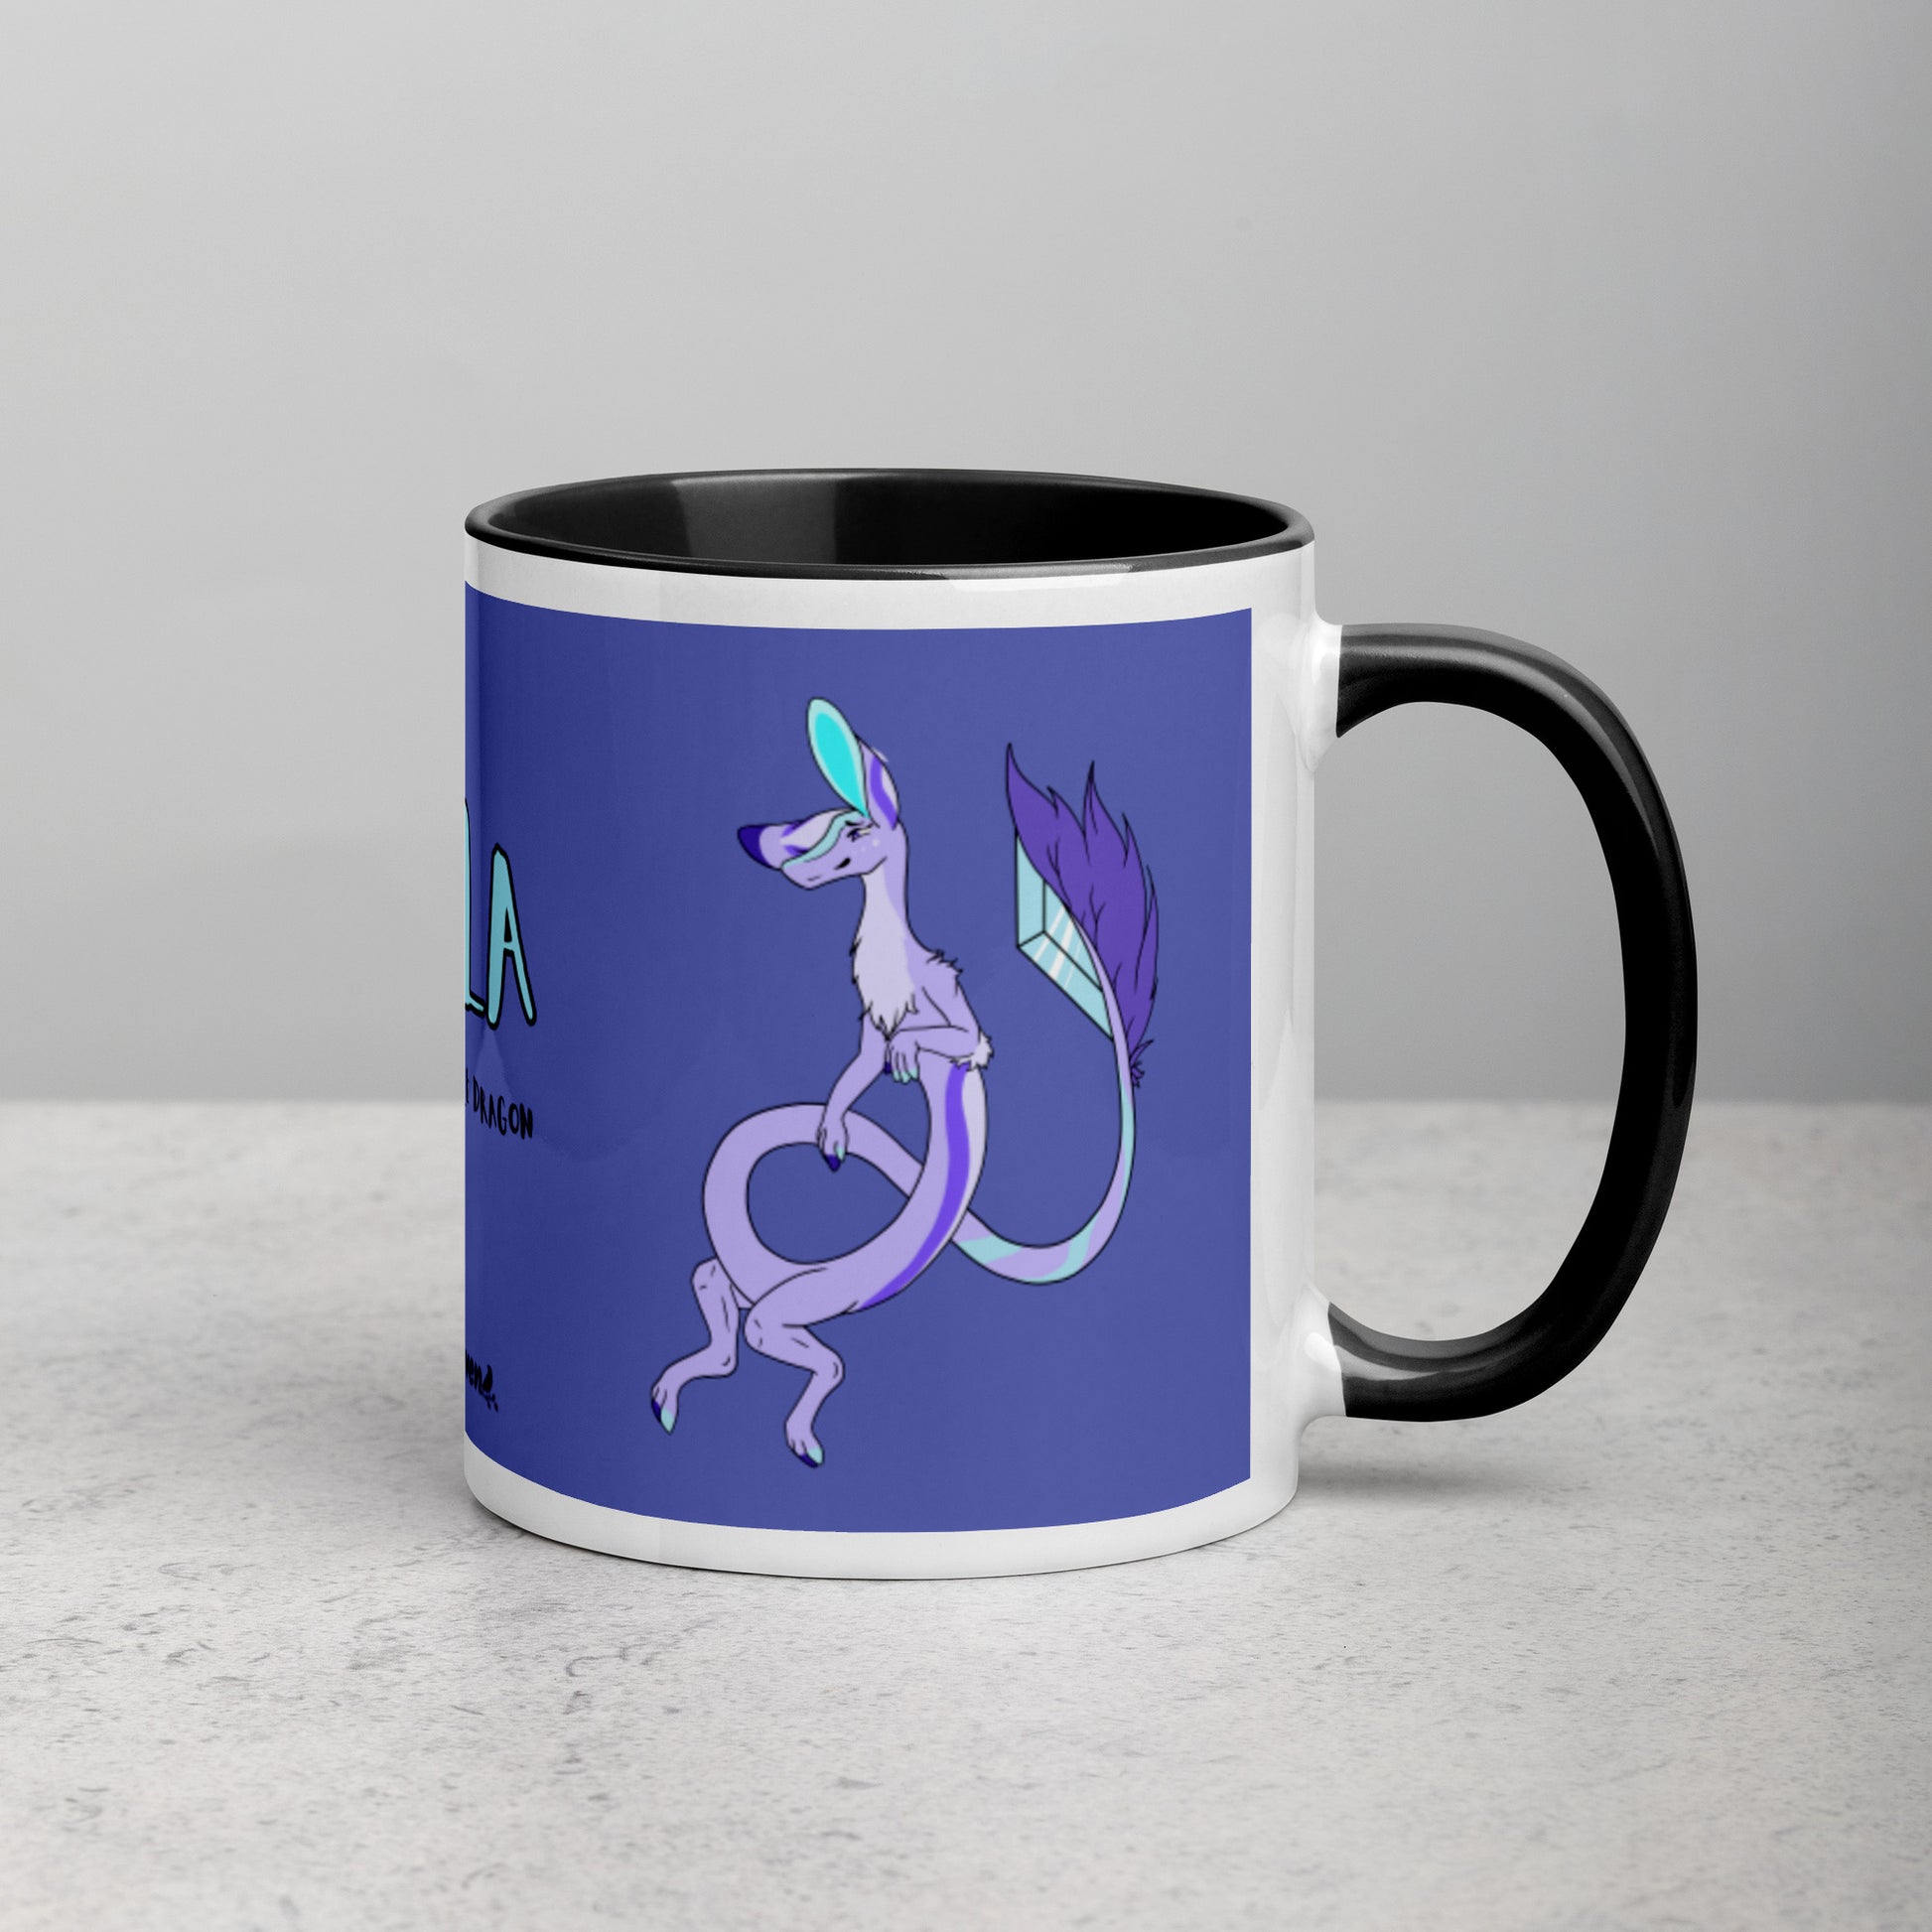 11 ounce white ceramic mug. Black inside and handle. Features double-sided image of Layla the Lavender Fuzzy Noodle Dragon. Shown on tabletop with handle facing right.